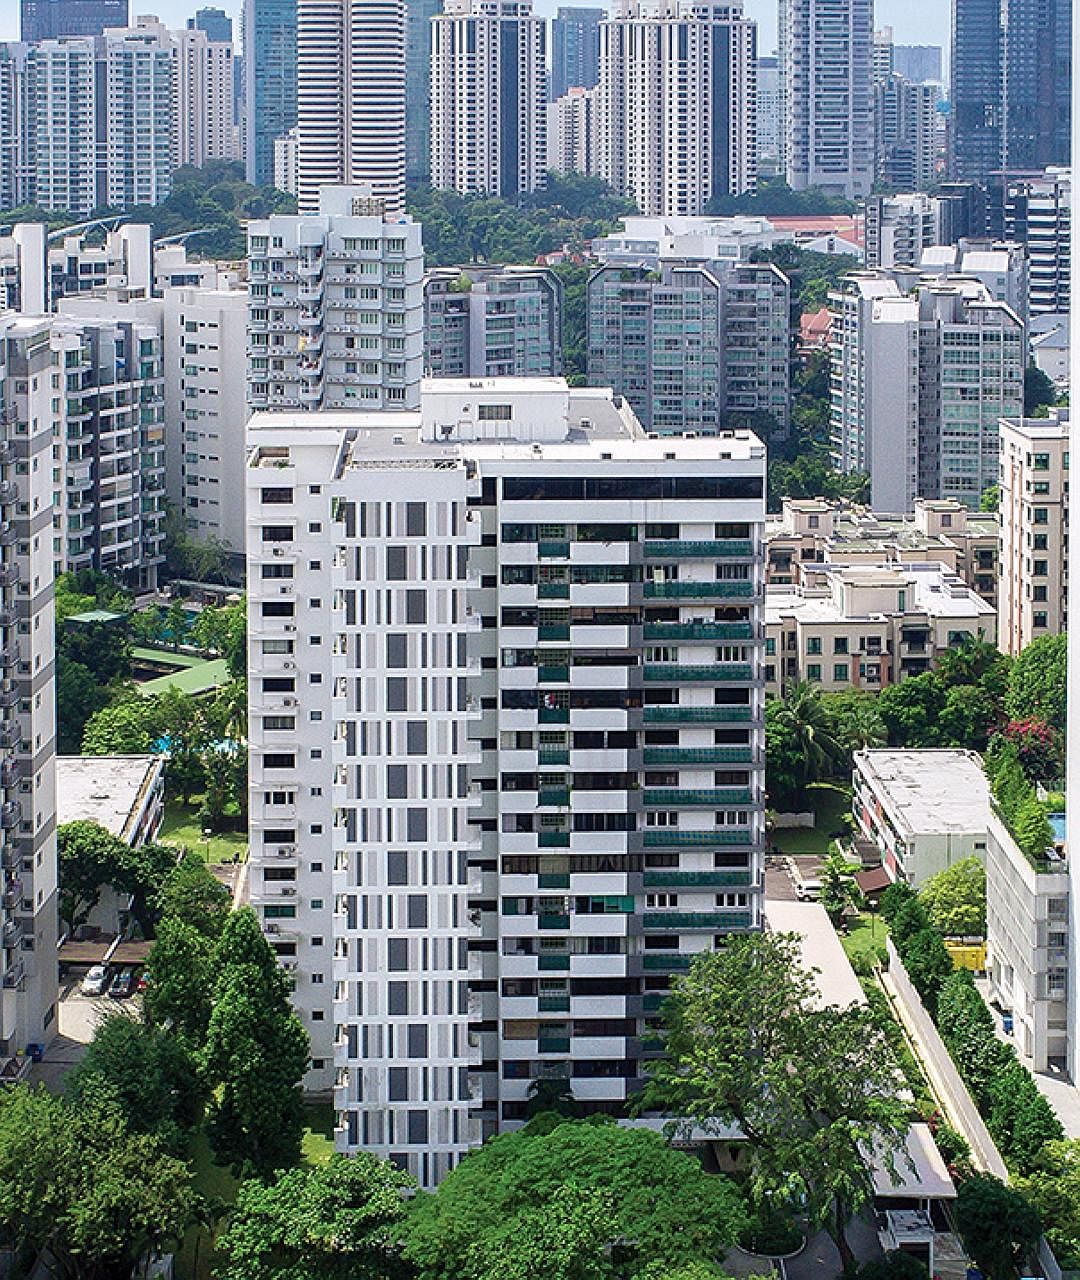 City Towers' sale had hit a snag after a pair of siblings, who owned two units, filed their objections in the High Court. But they later withdrew their objections and the sale order approving the collective sale was issued in May this year.